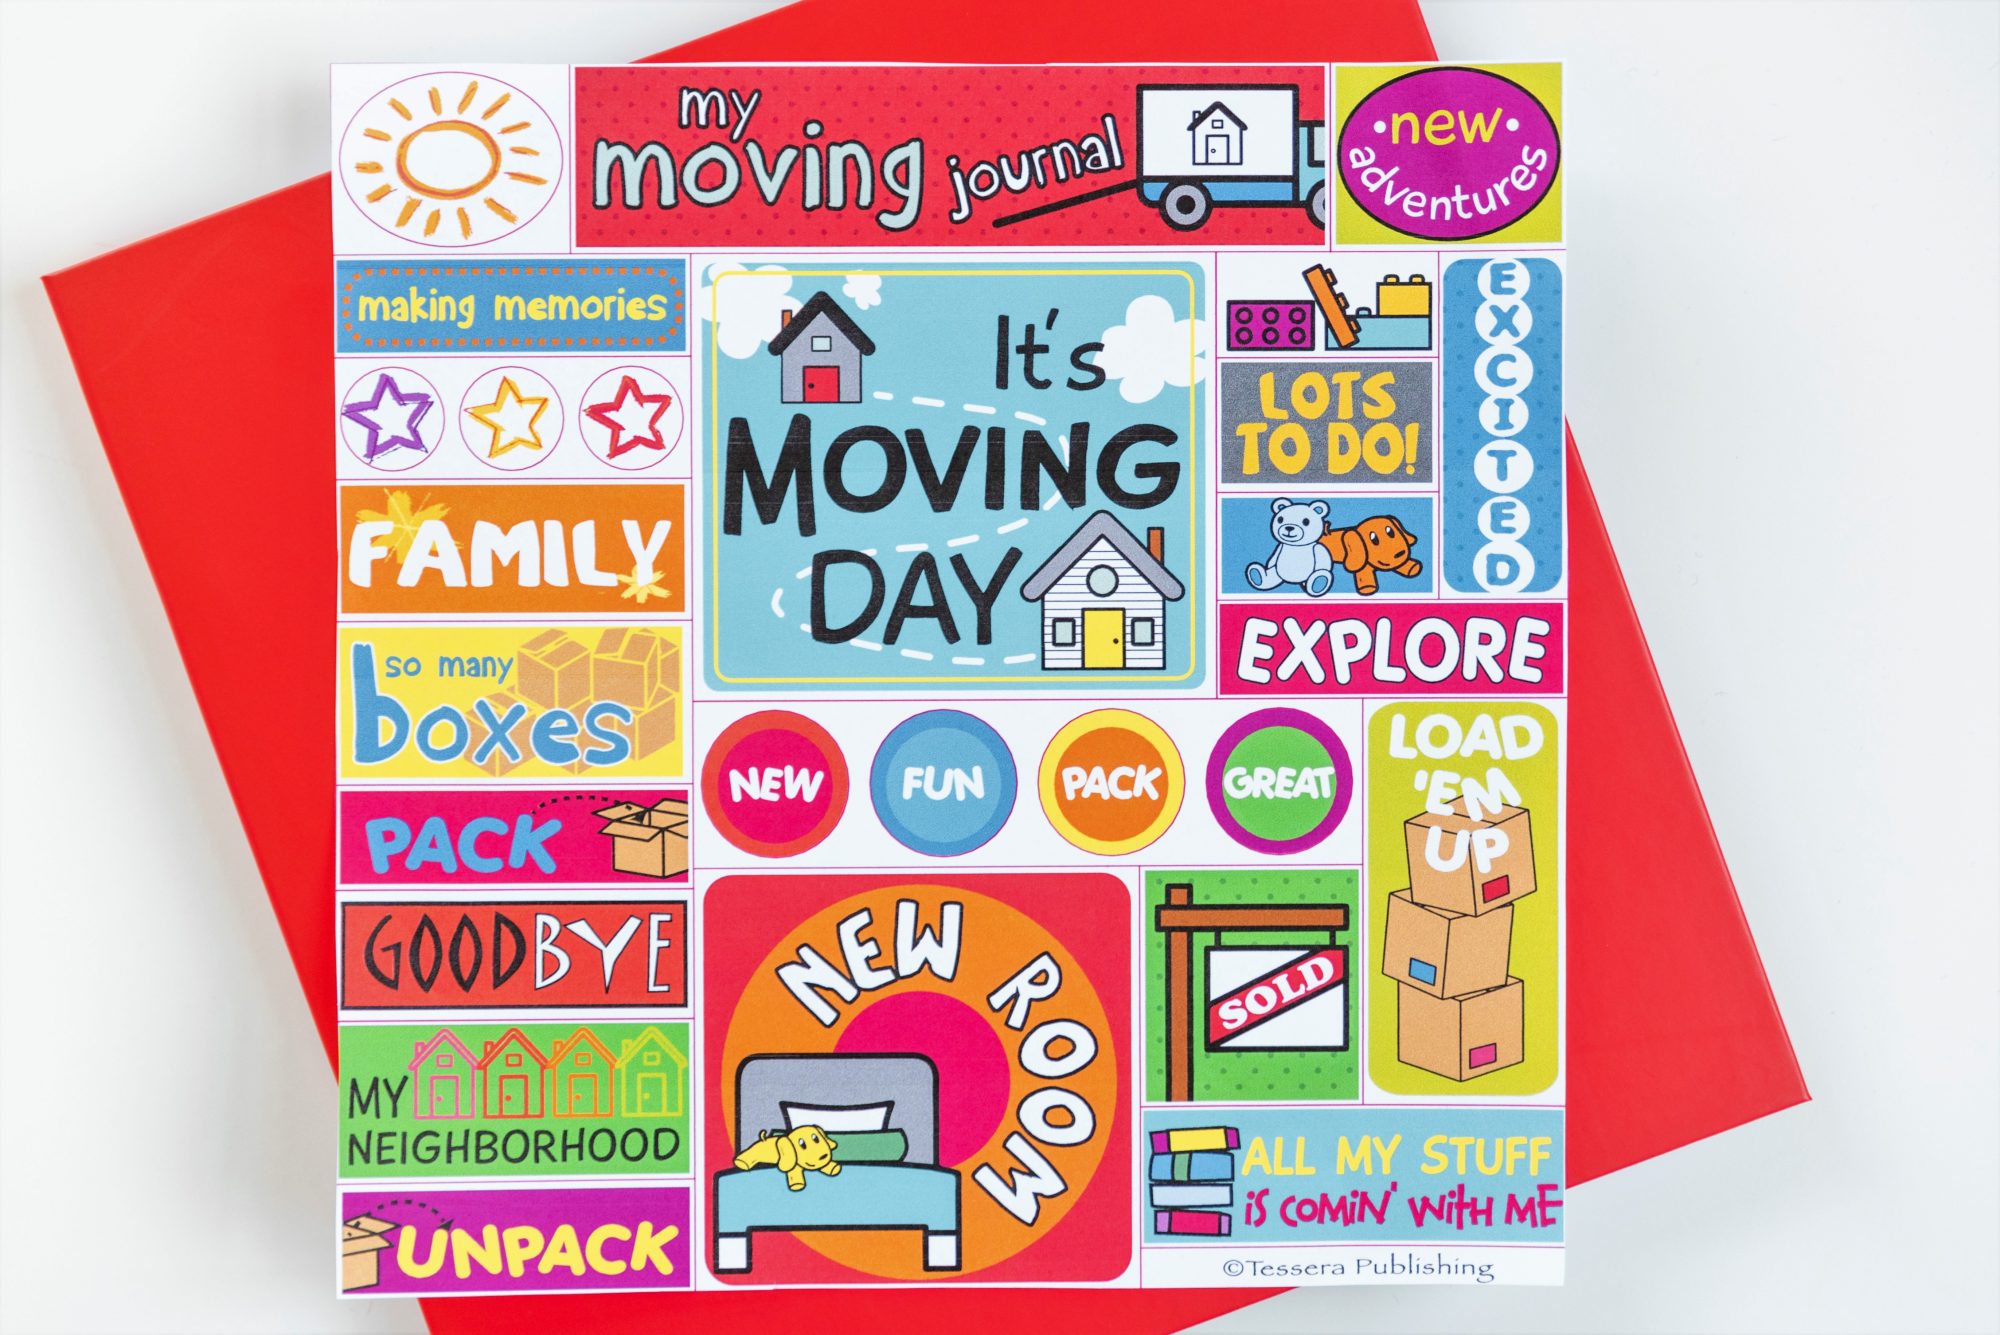 Kids moving journal red cover with sticker sheet included